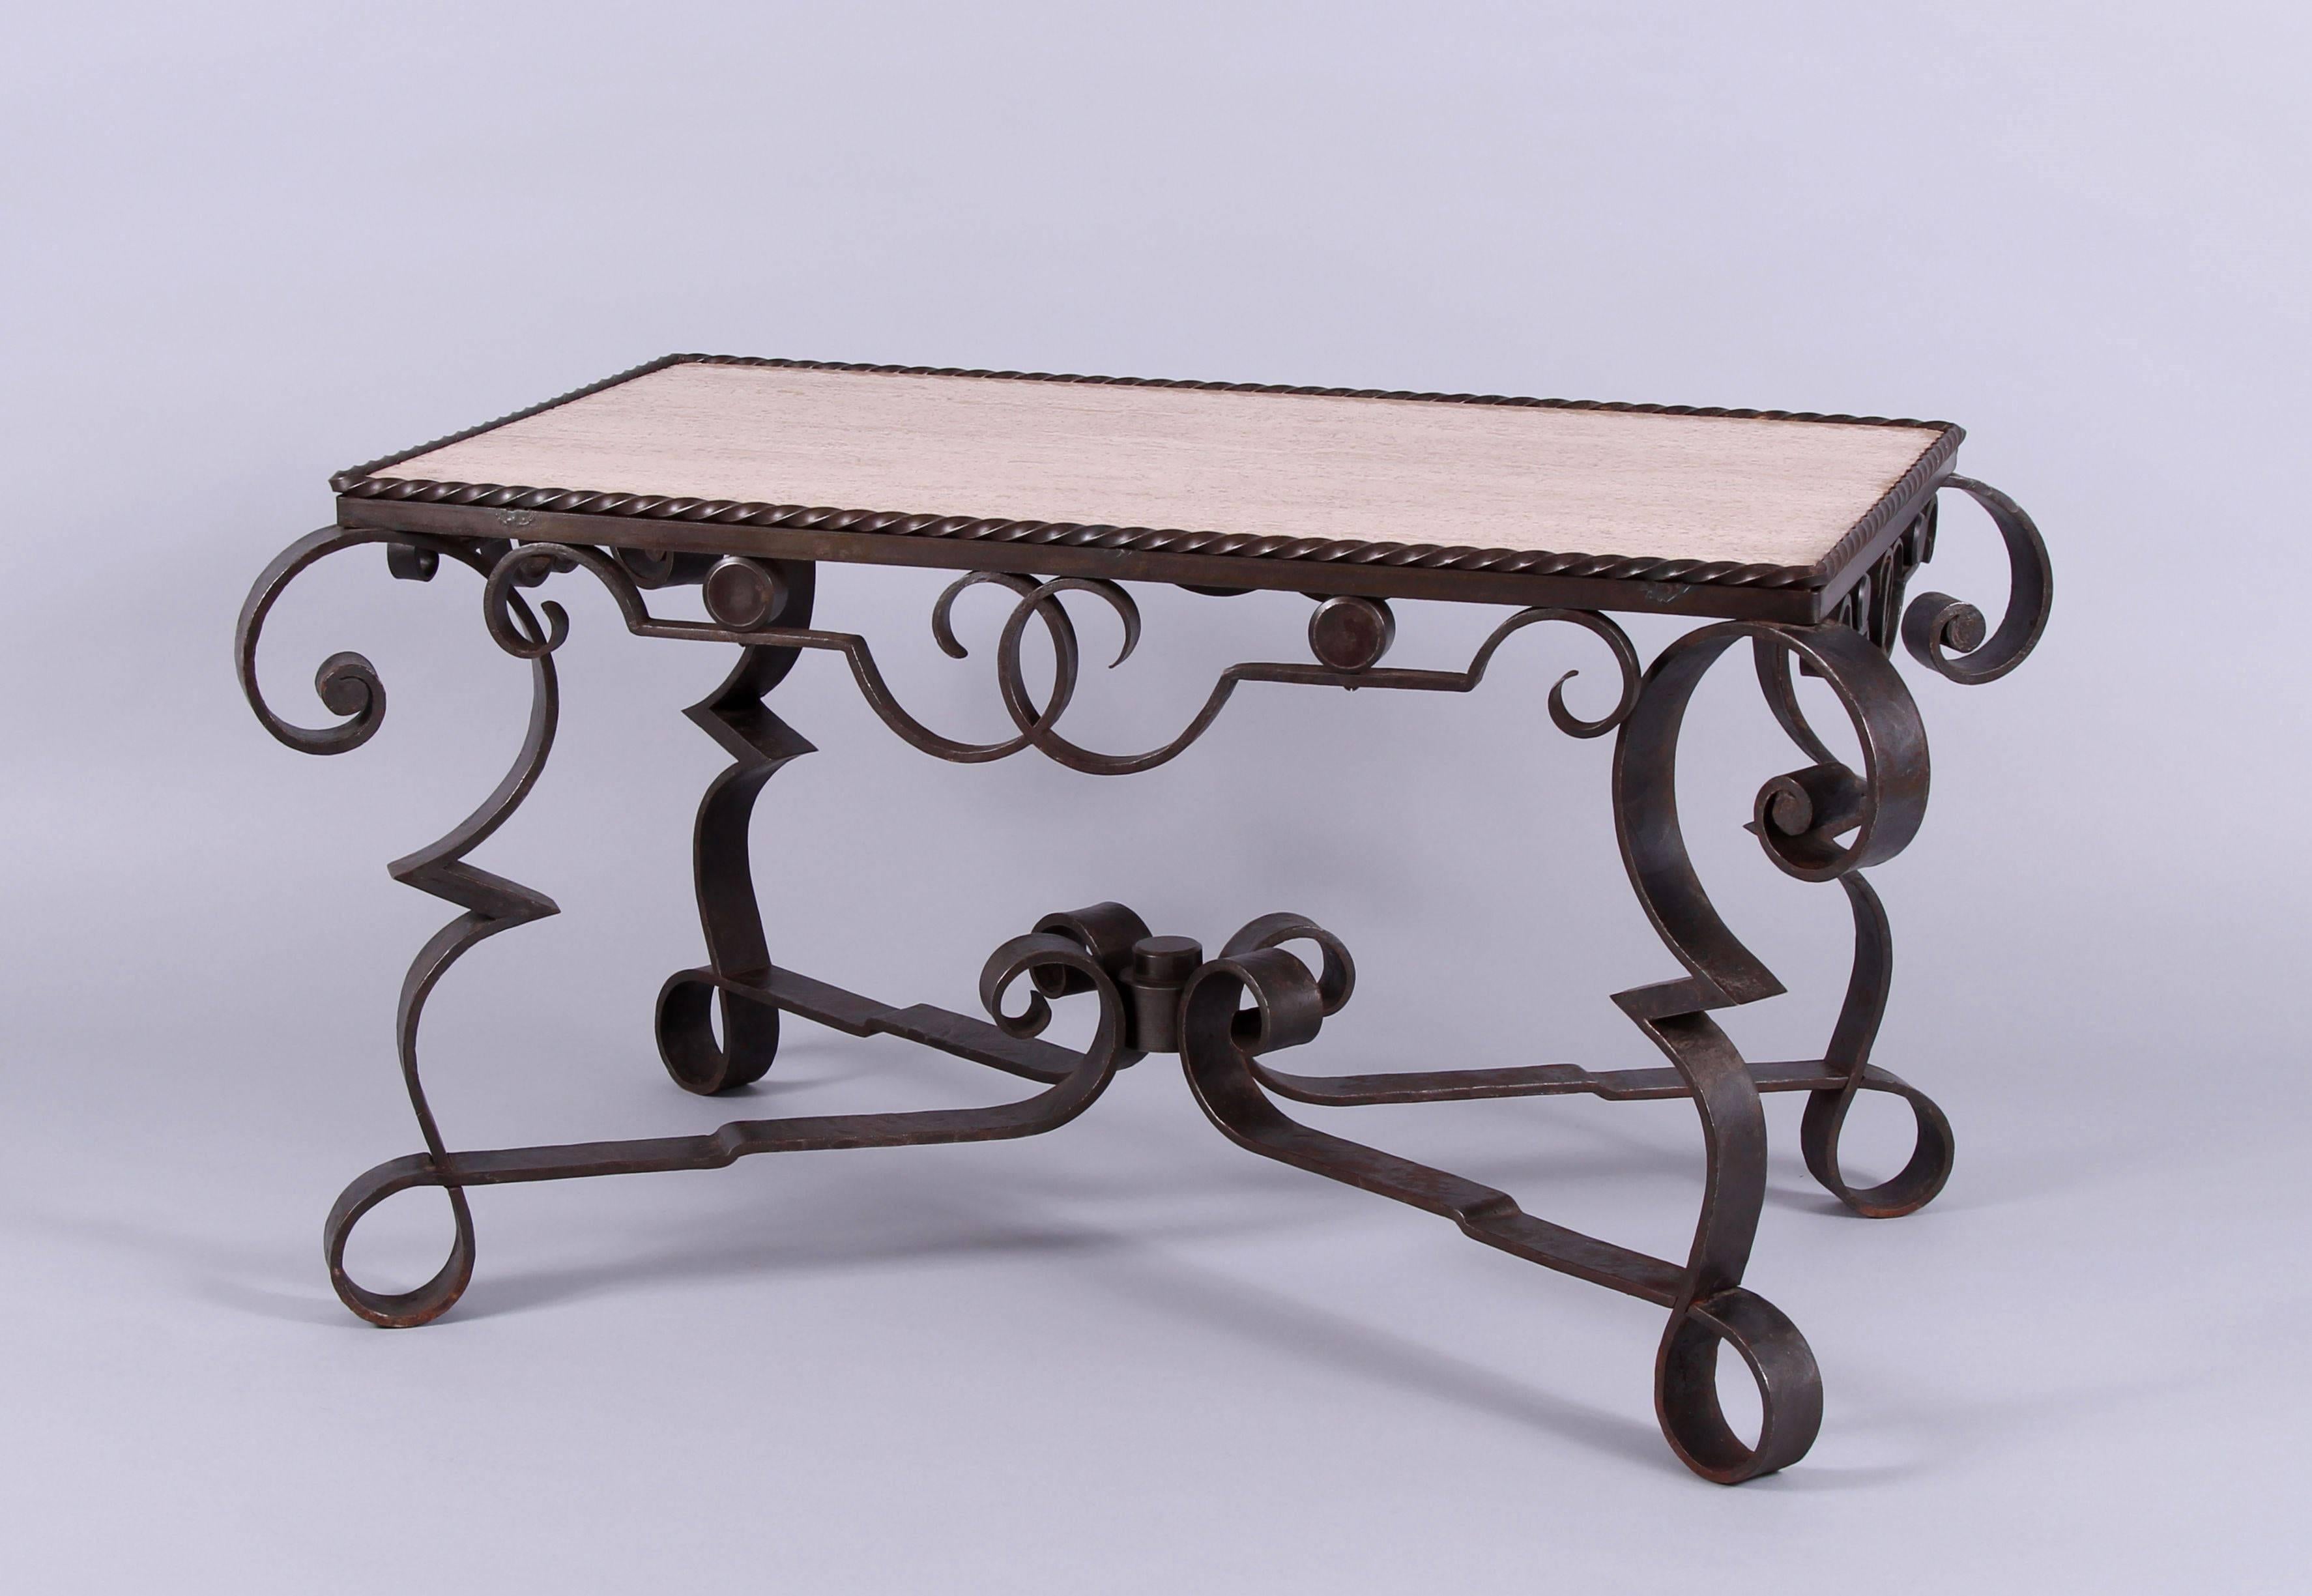 Hammered Early 20th Century Marble Wrought Iron Coffee Table, Art Deco